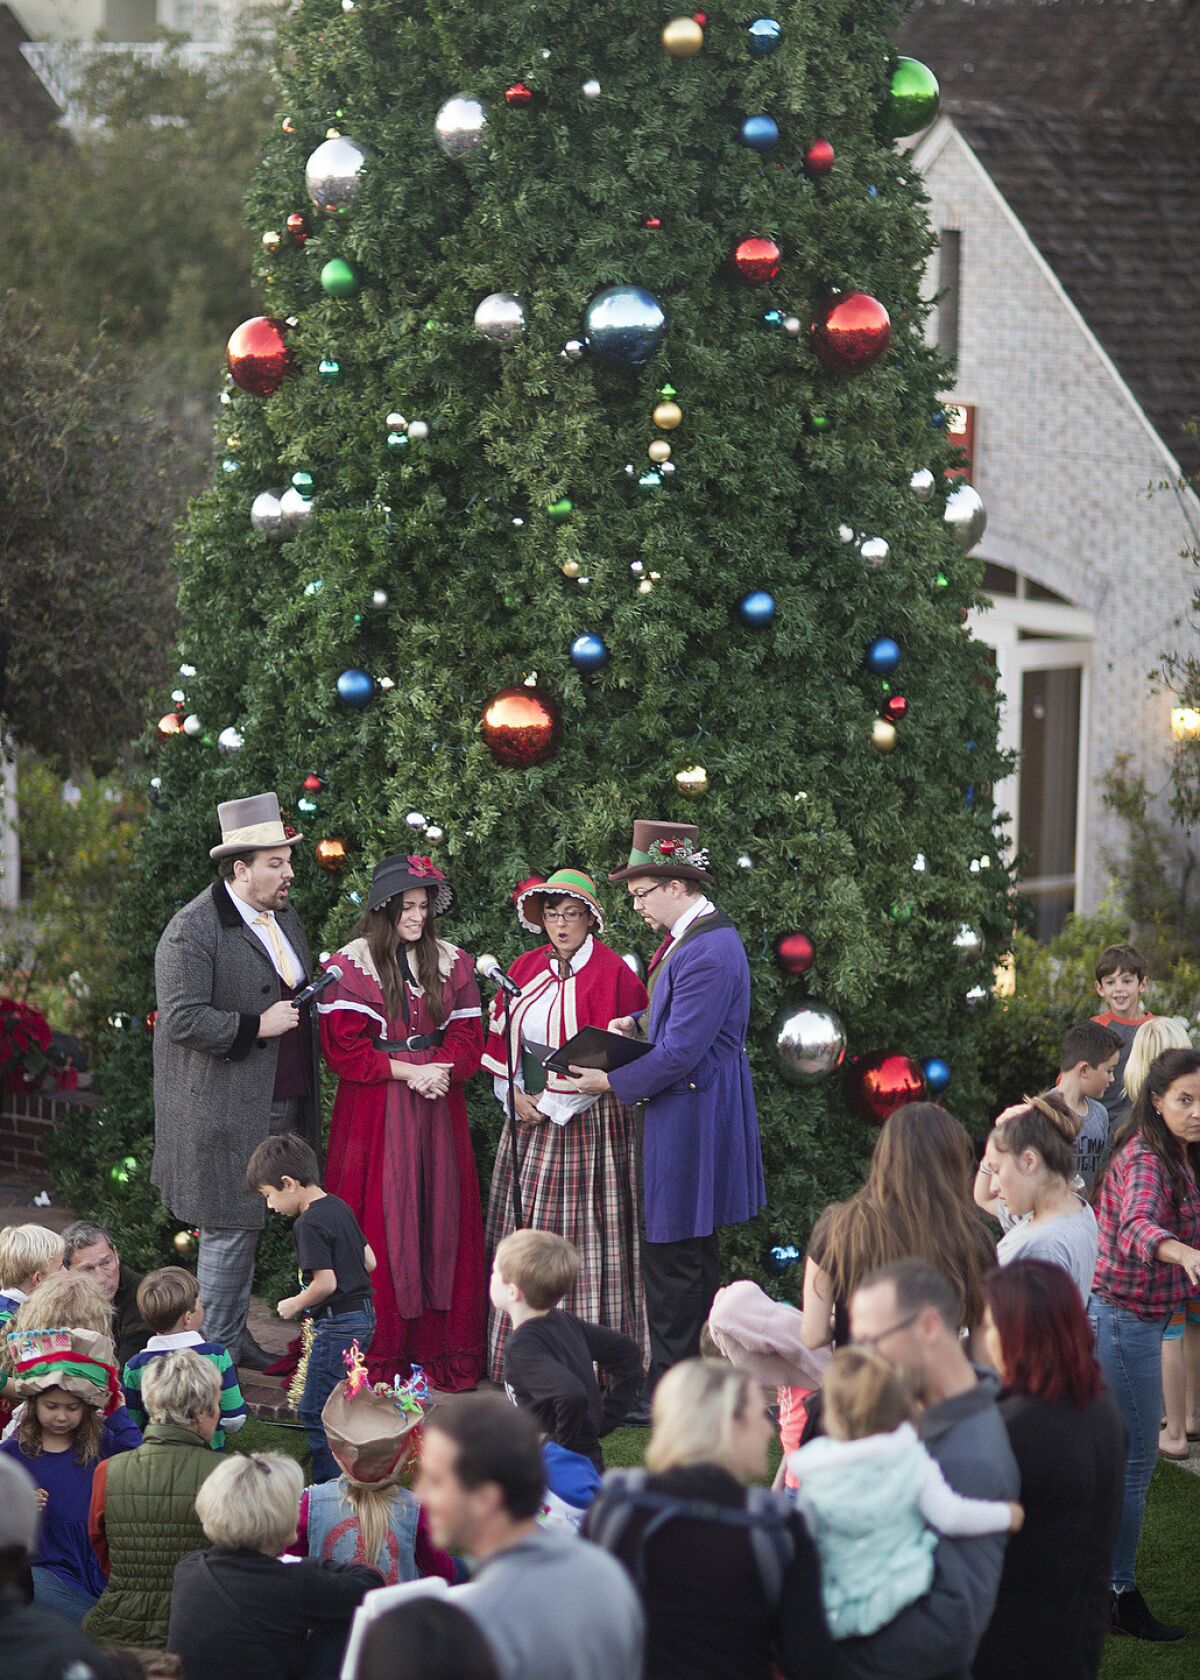 The Tinseltown Carolers perform at a previous Santa by the Sea event in Del Mar.